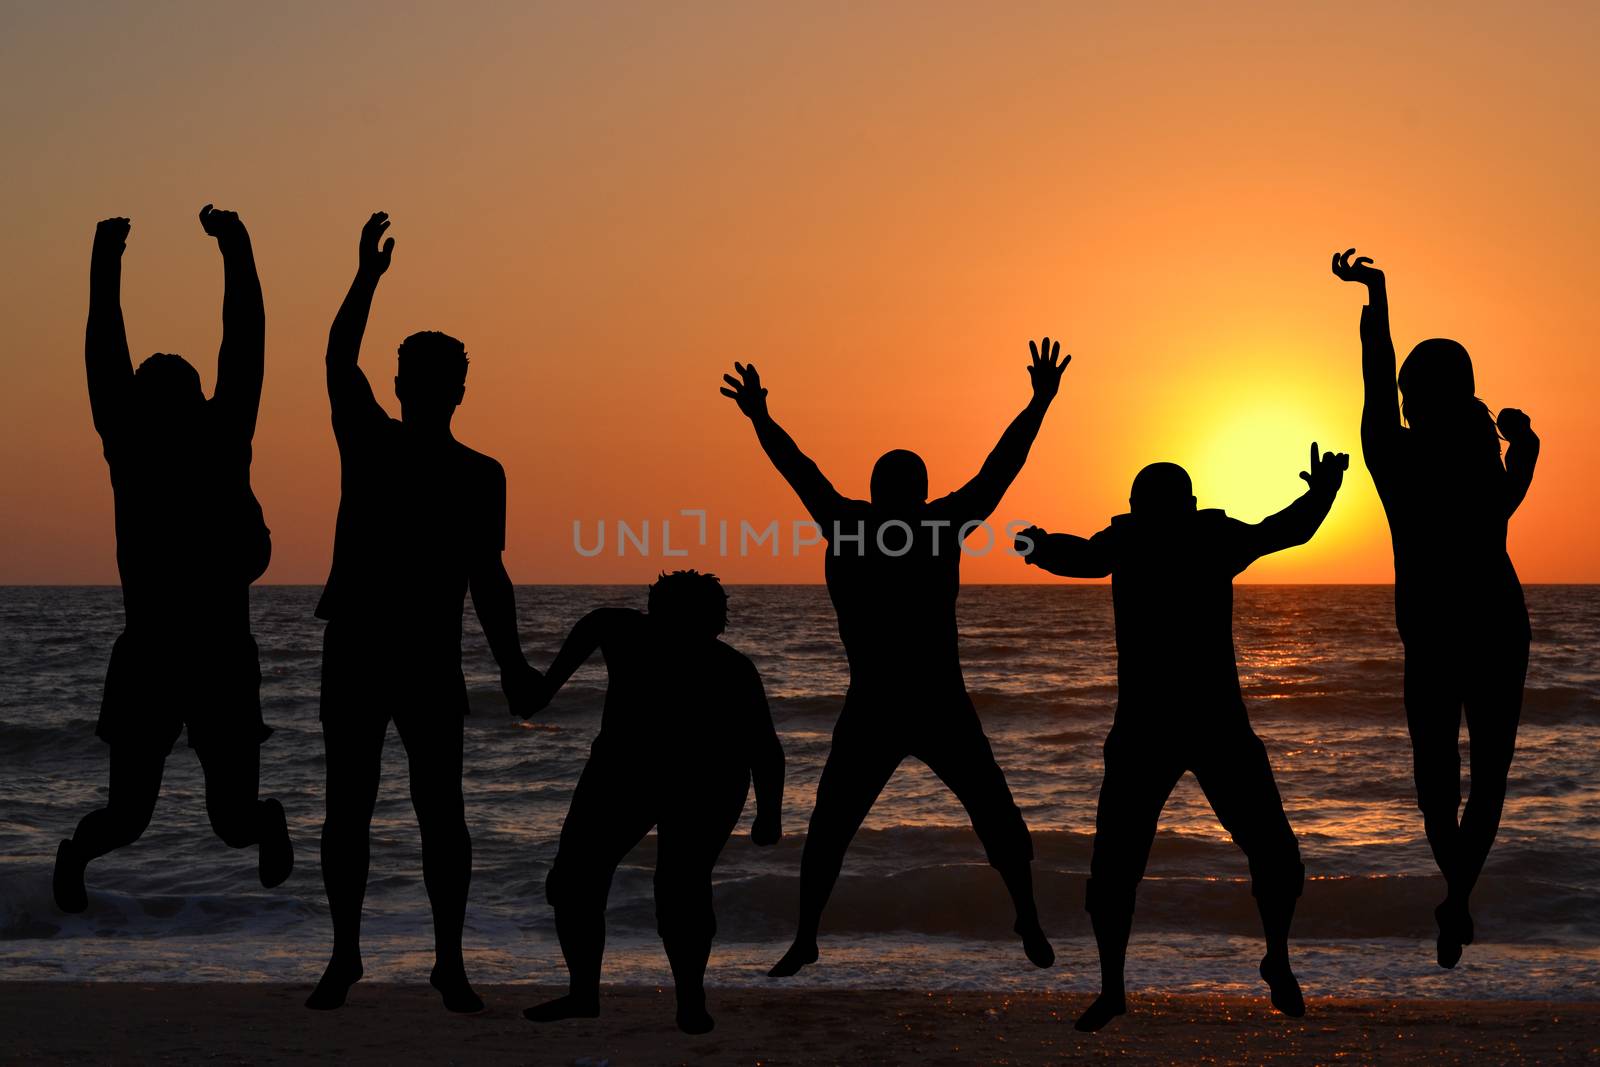 Silhouettes of people jumping on beach